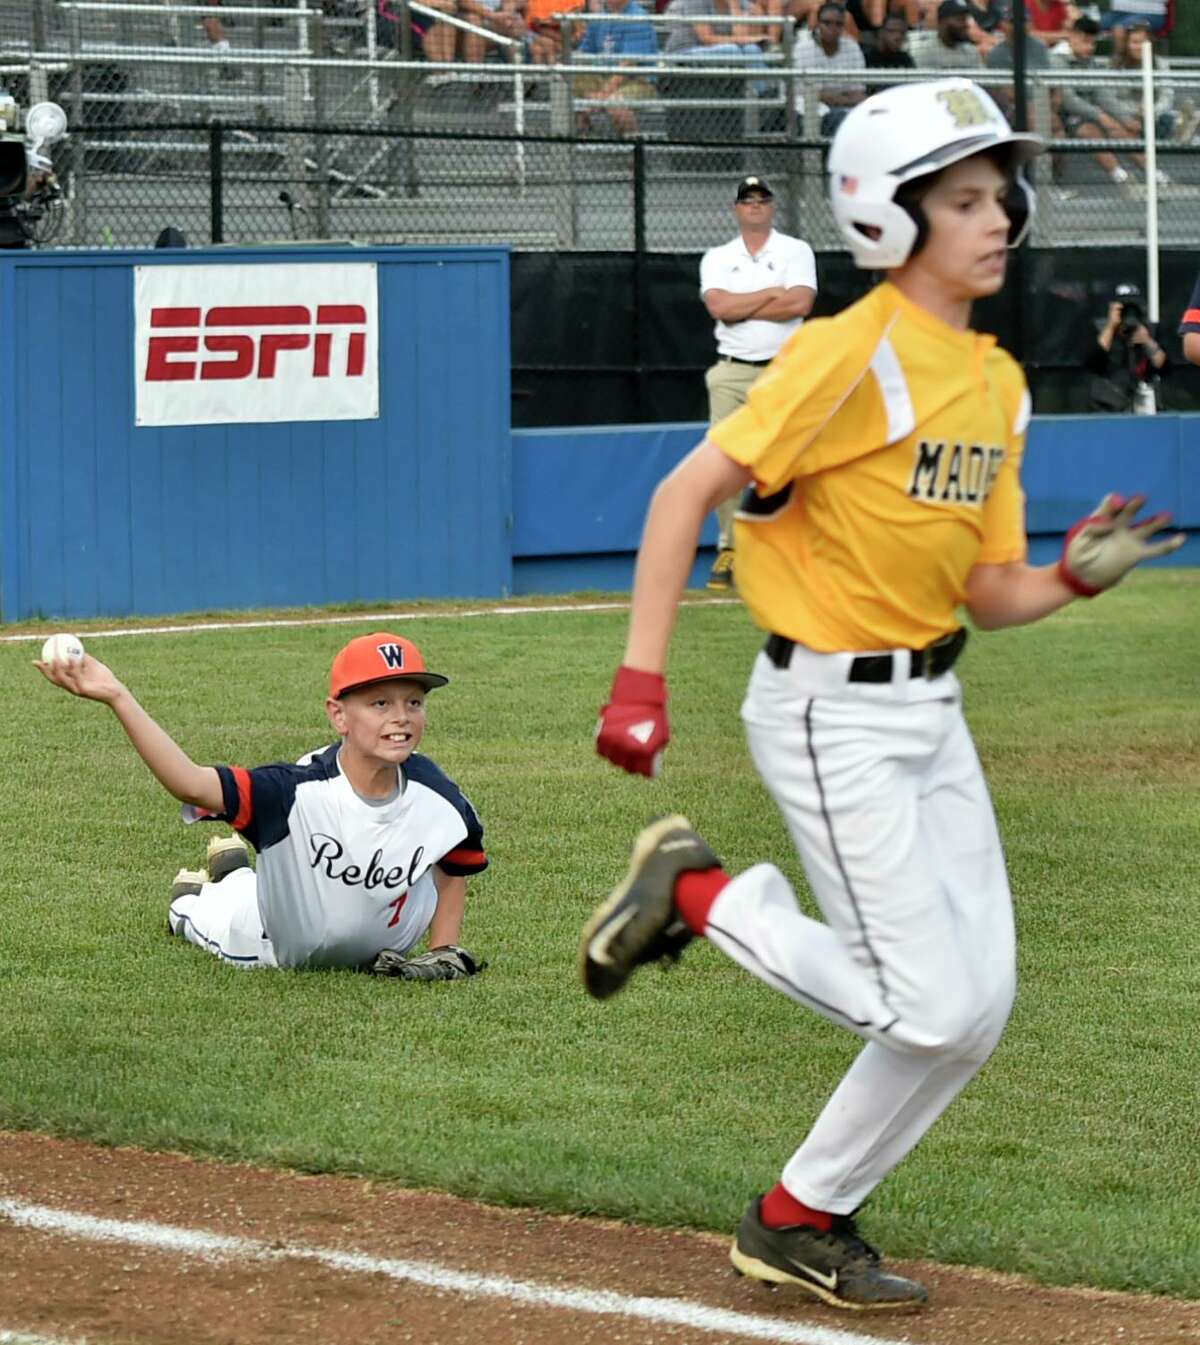 Connecticut’s Rocco Zagami runs safely to first base after dropping a bunt against Massachusetts pitcher Beckett Delleo during the Little League Eastern Regional in Bristol on Tuesday.